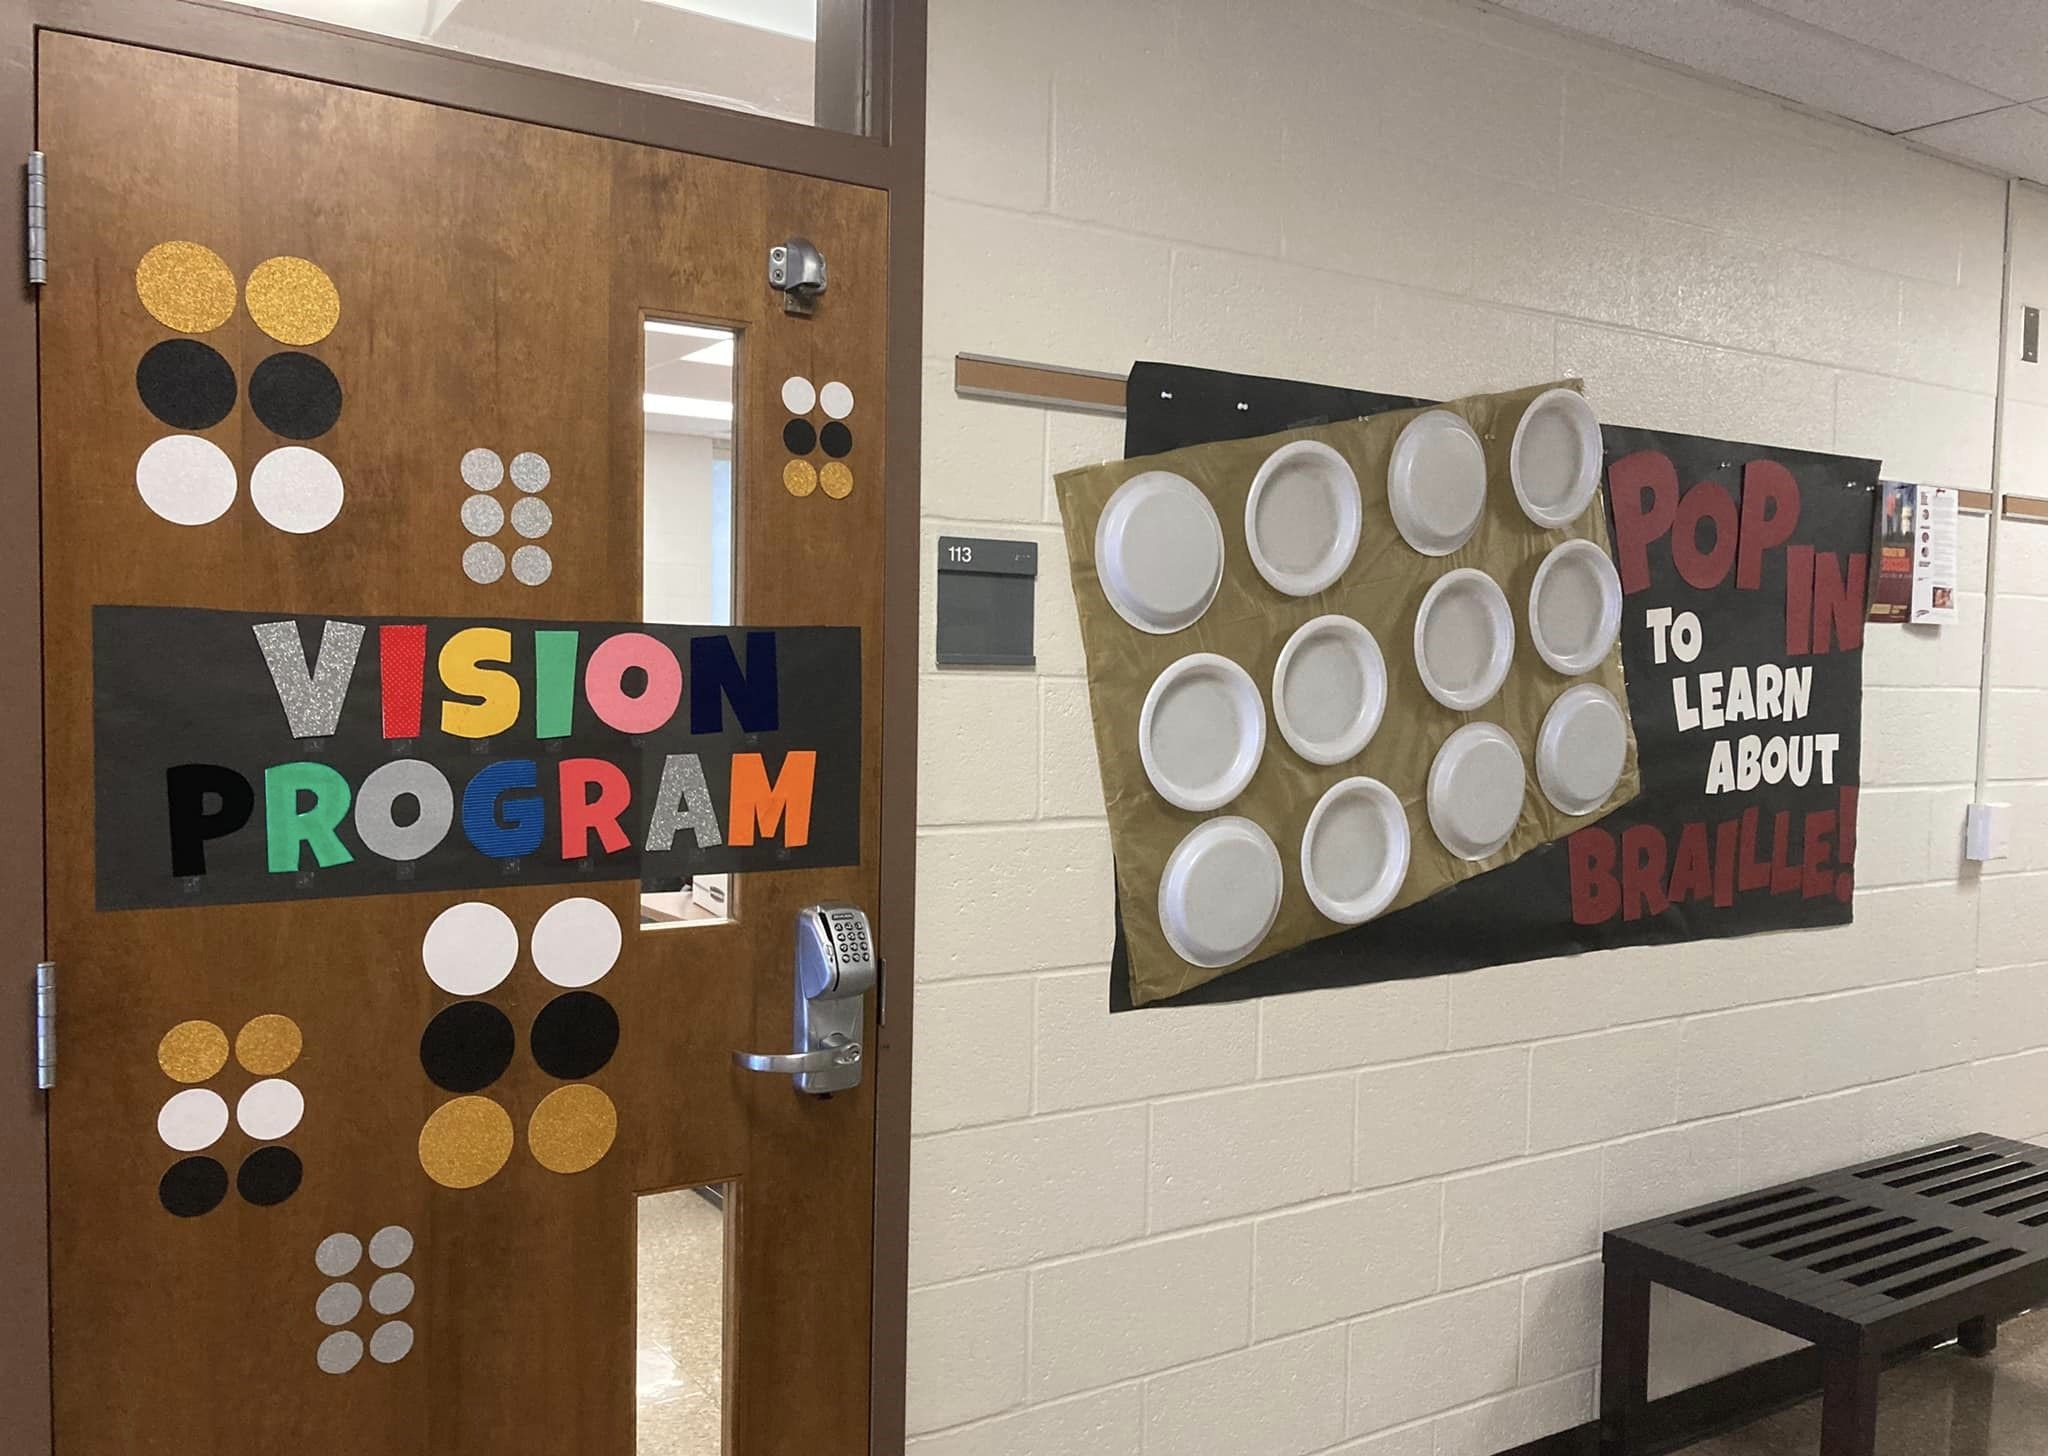 Door and wall display for a vision classroom that has textured letters and braille letters.